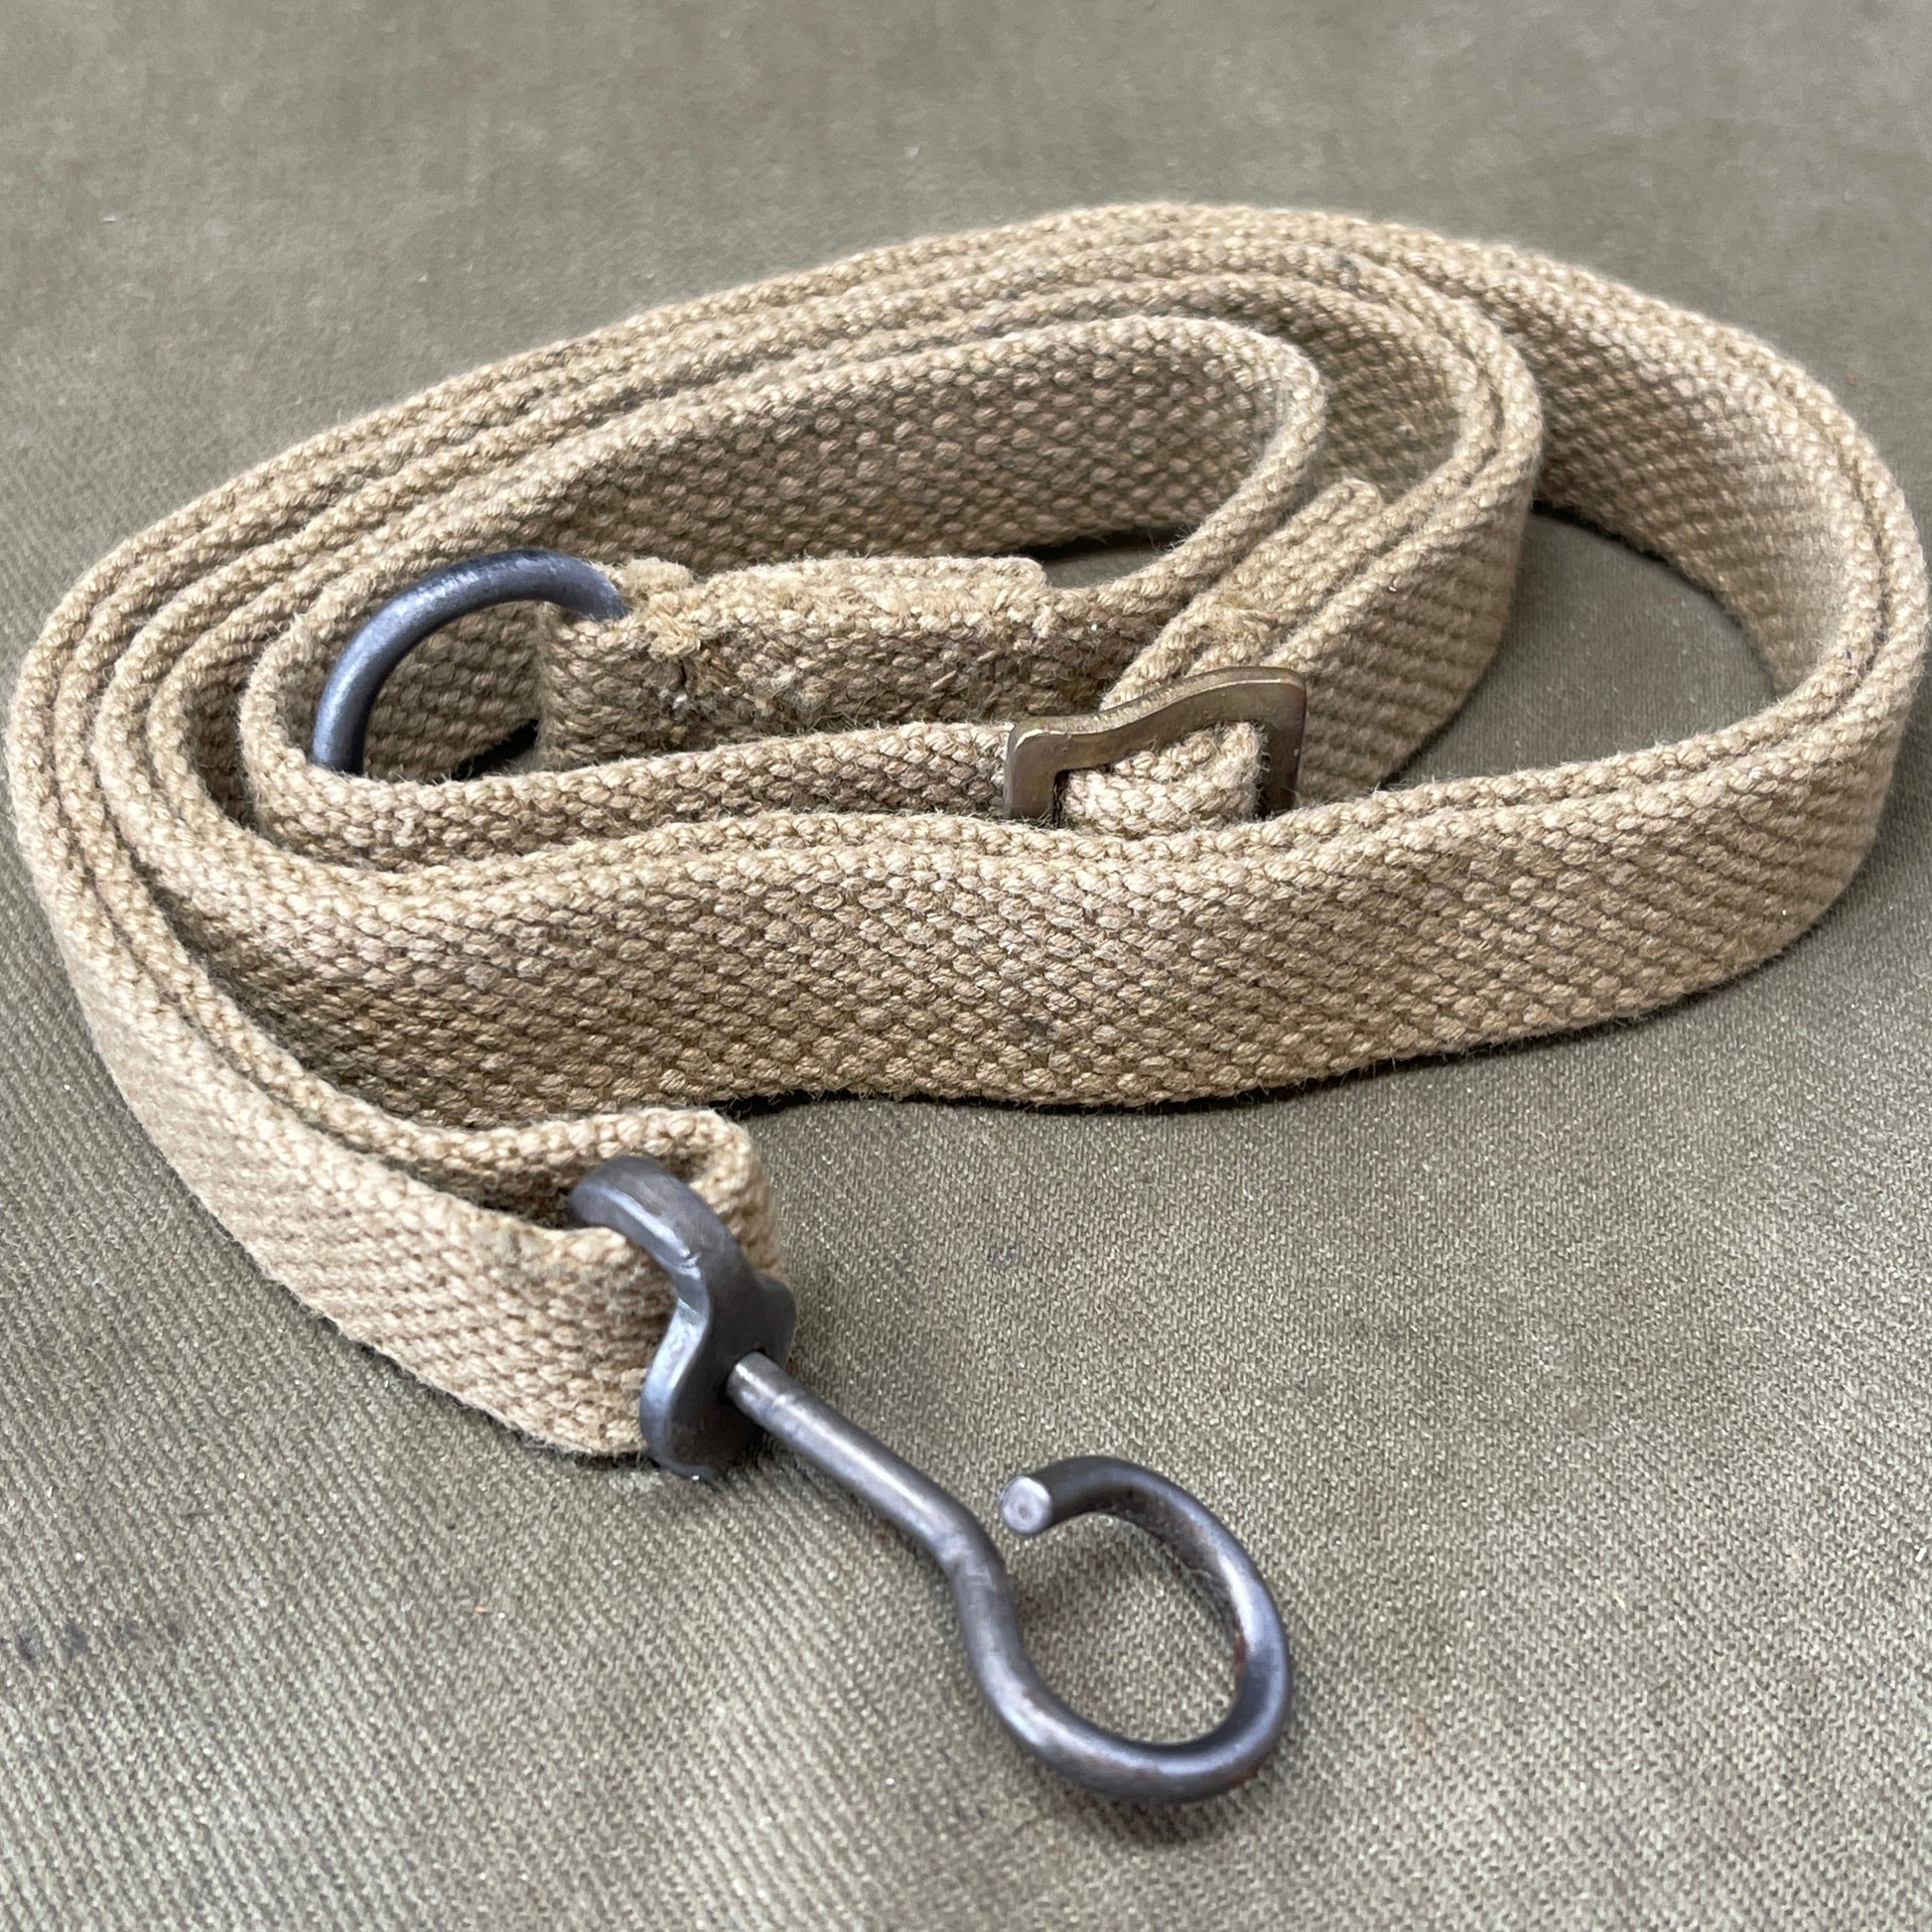 "Authentic British Army WW2 Sten Gun Sling for collectors and reenactors. Durable, adjustable, and historically accurate, perfect for adding a touch of authenticity to your WW2 collection."